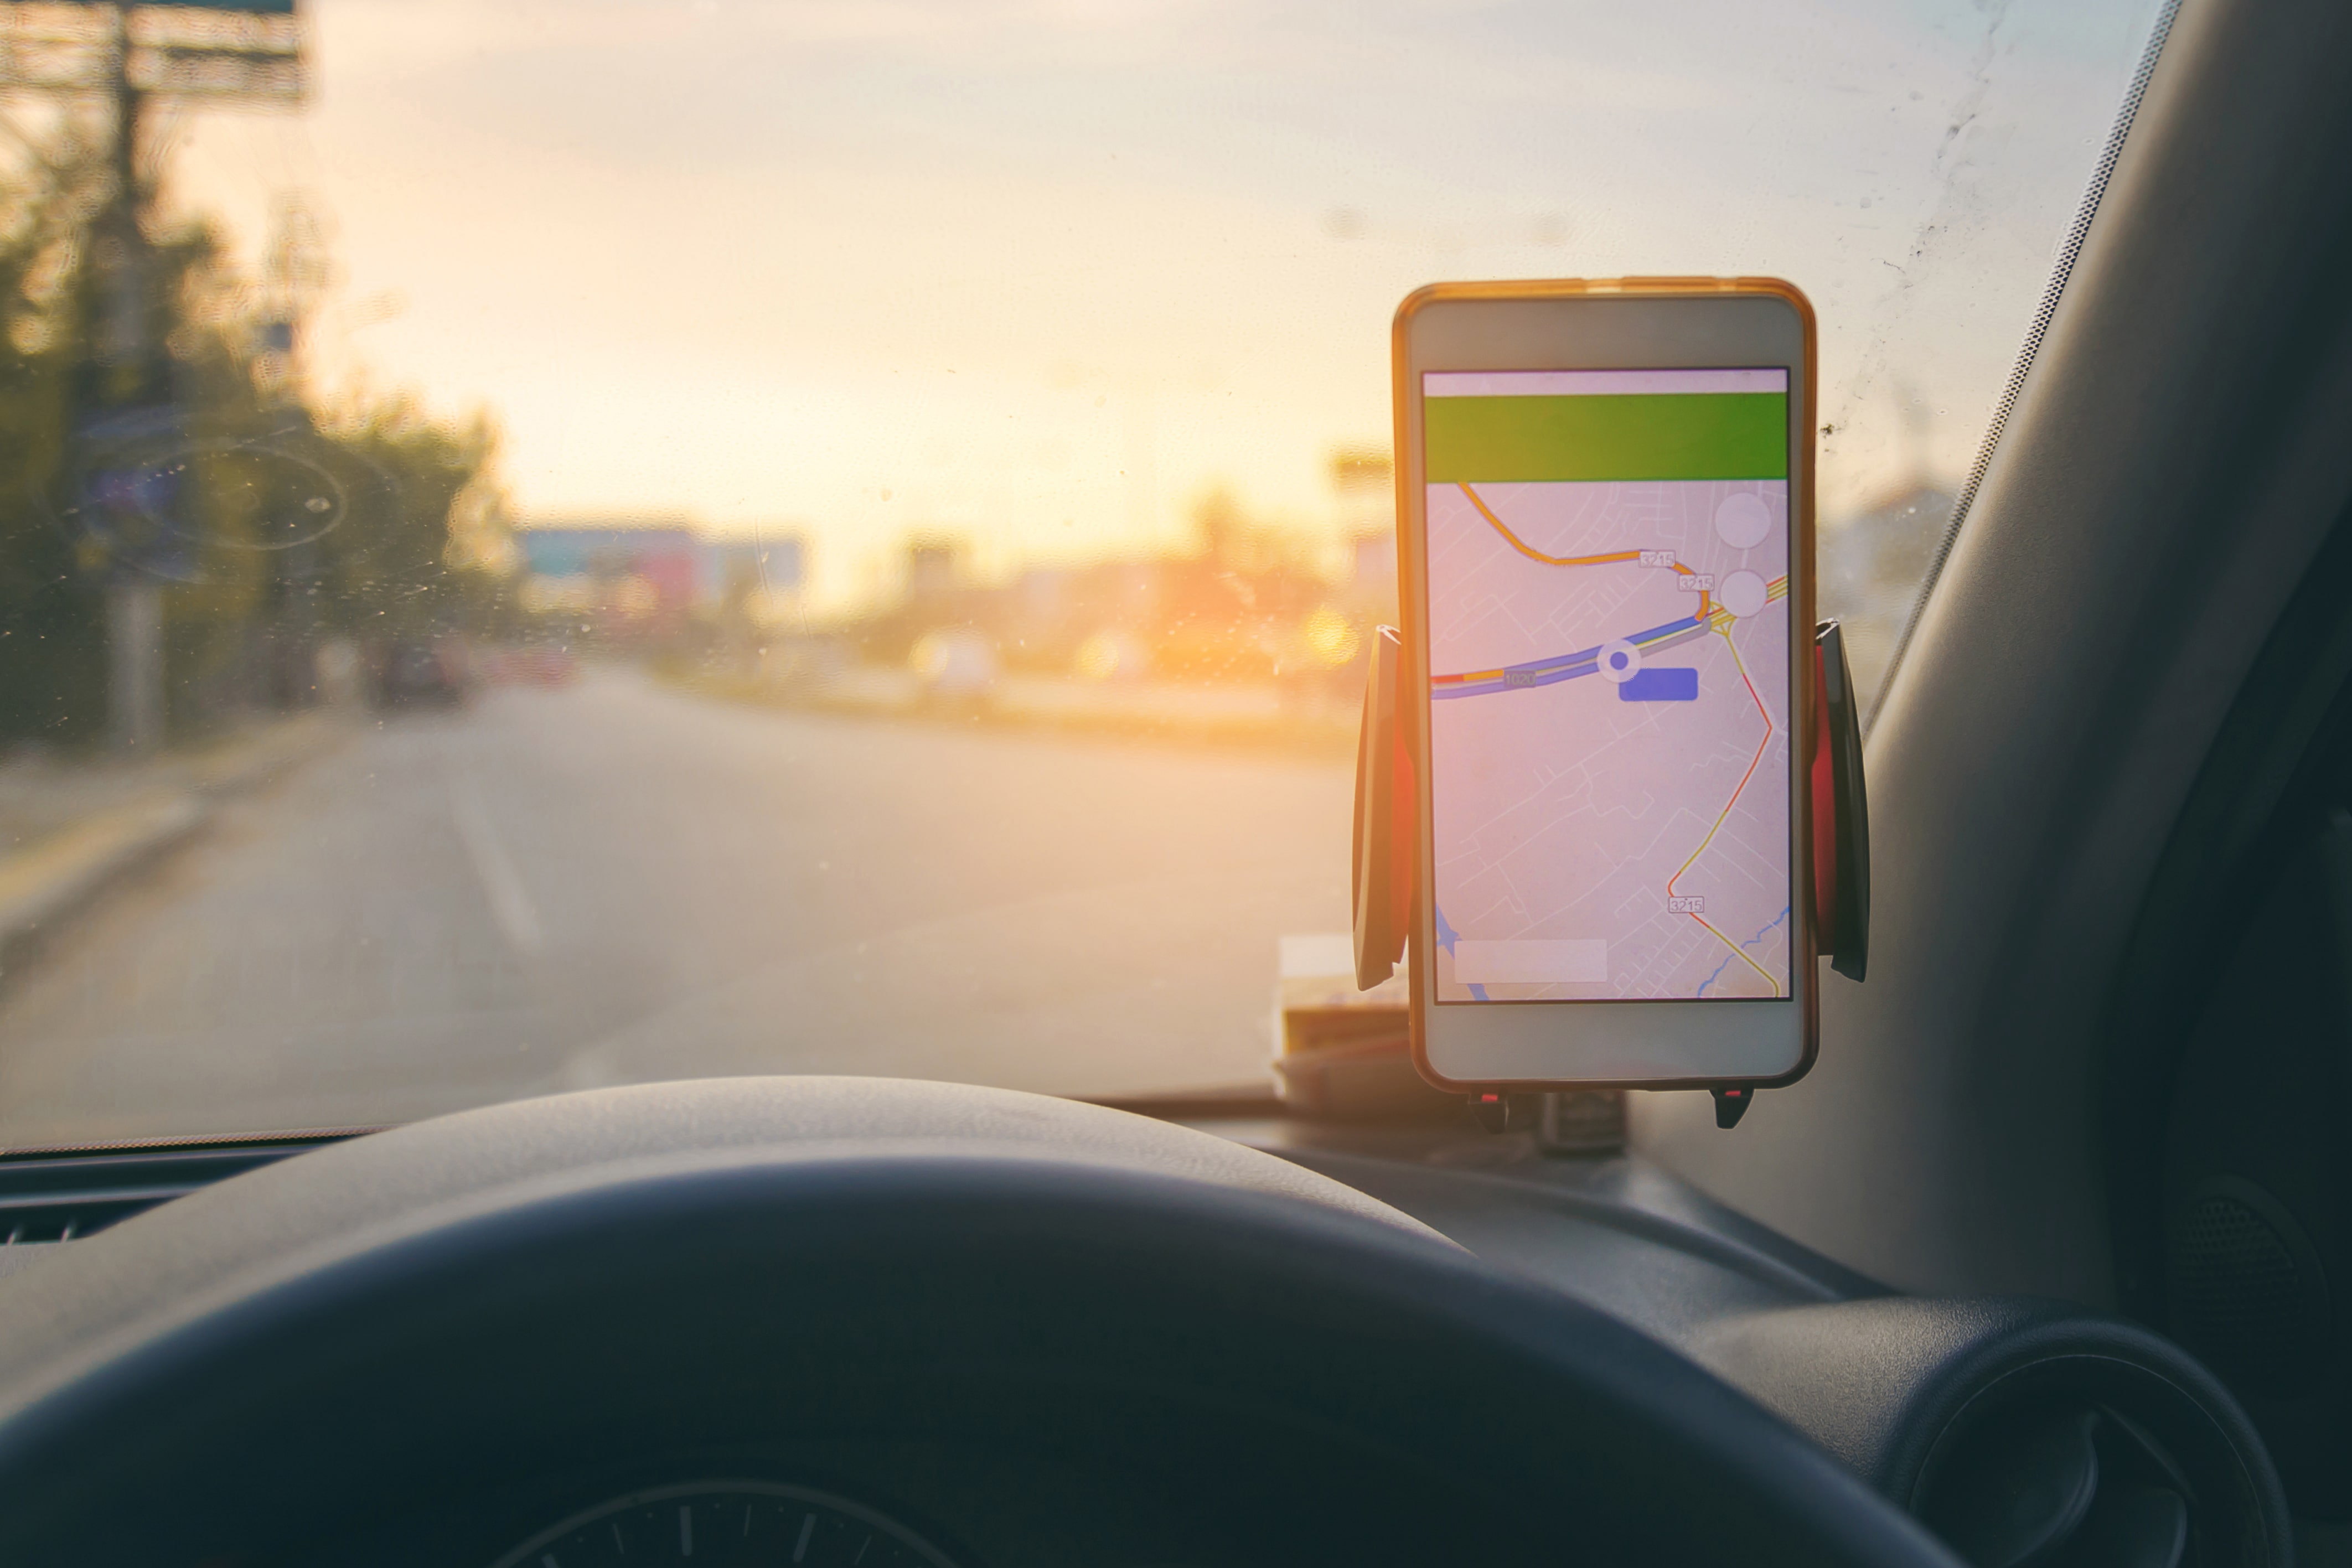 A smart phone in a car holder showing a route on Google Maps/